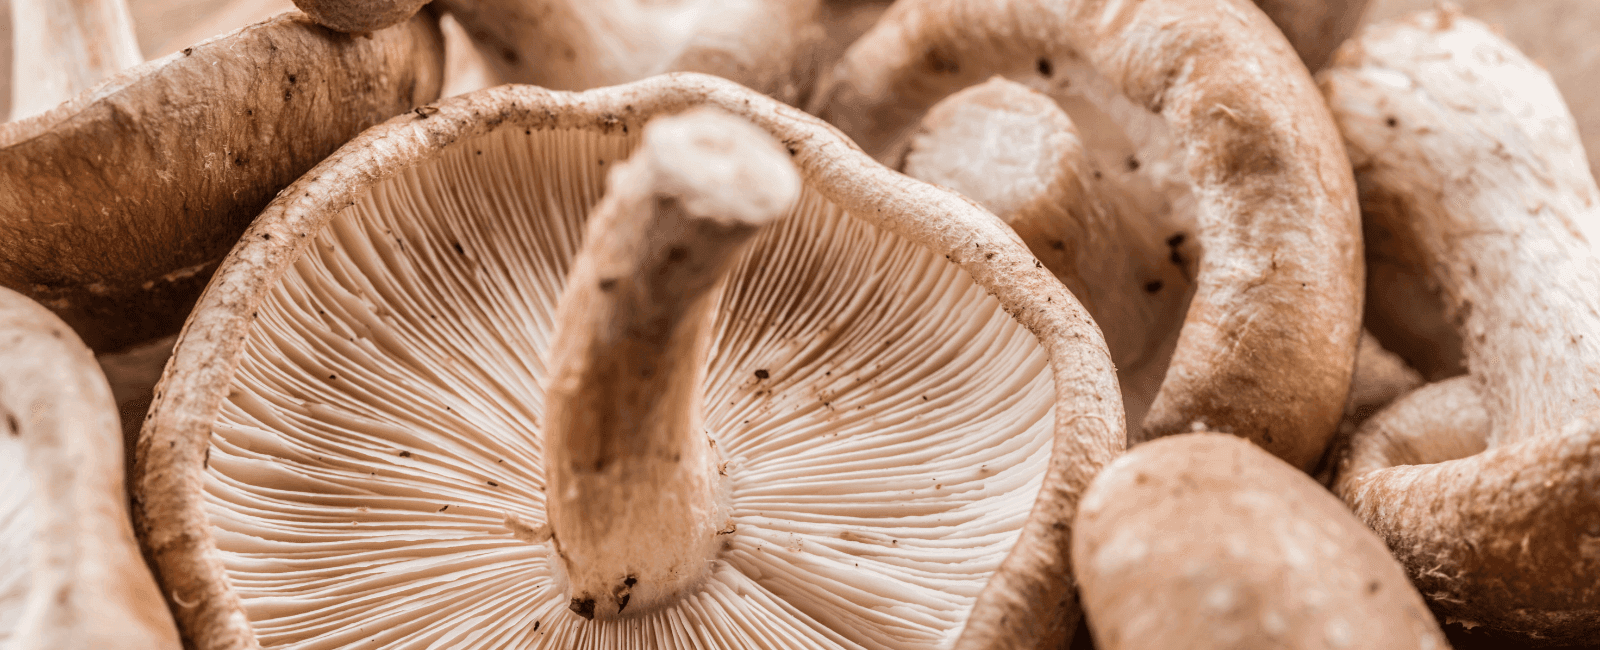 Gut-Friendly Mushrooms Could Help Aid Probiotic Treatments and Regulate Cholesterol